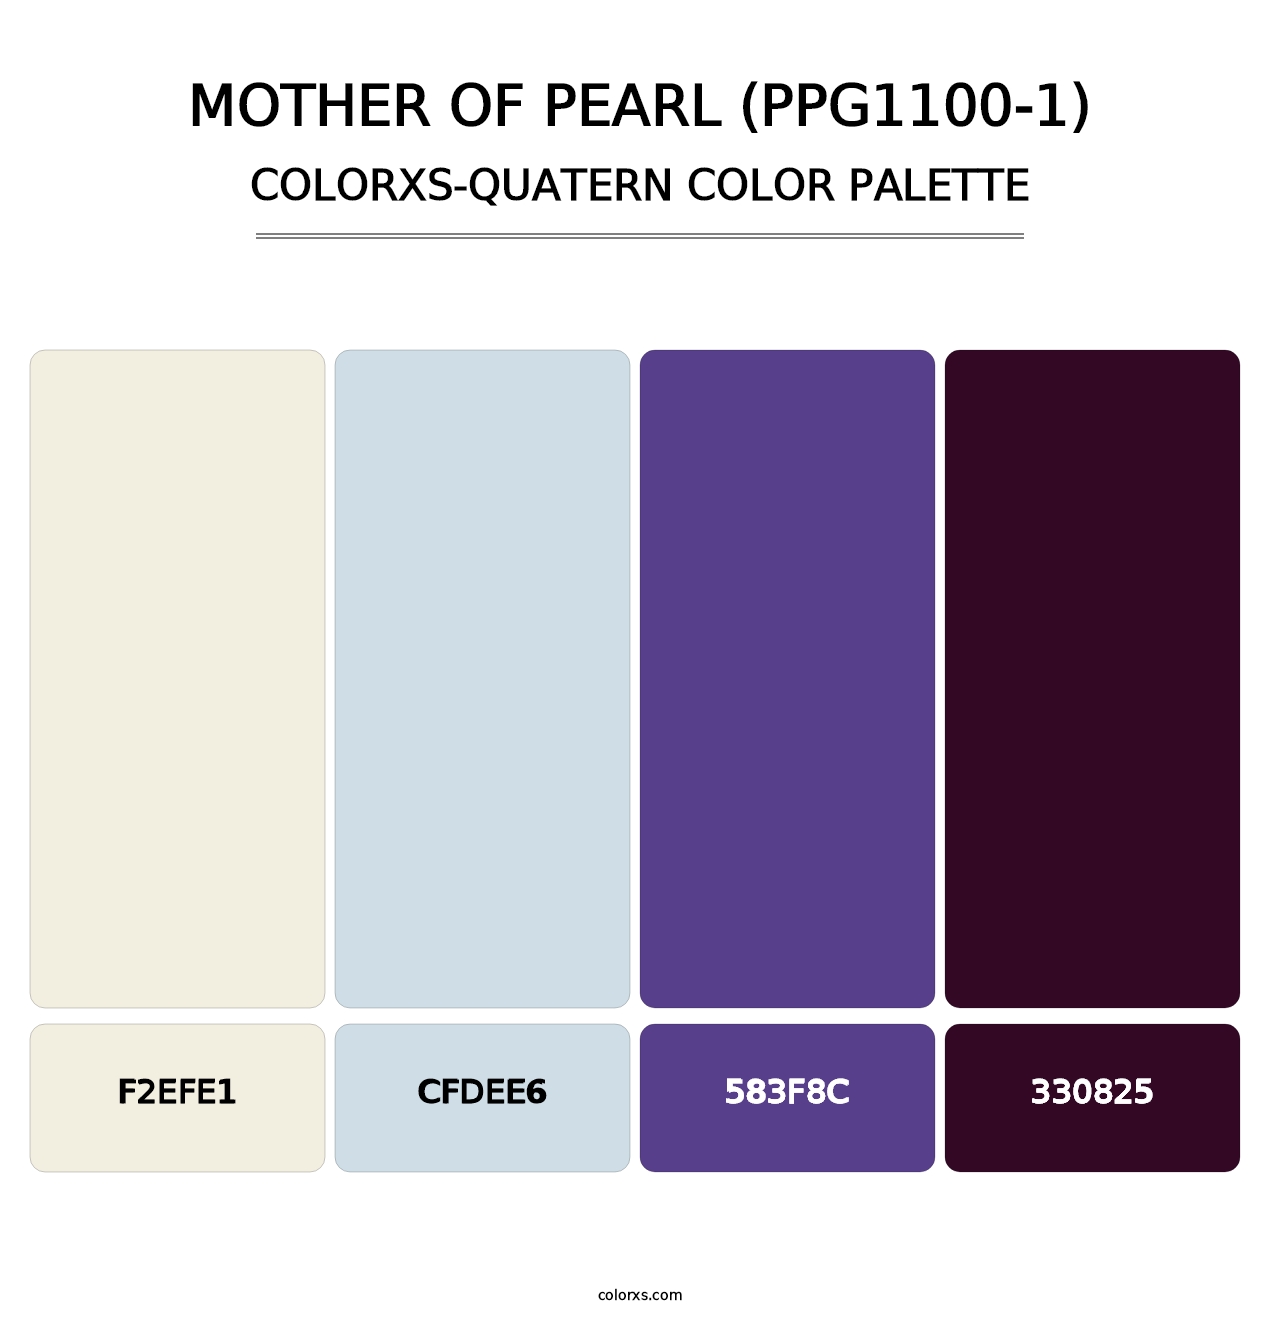 Mother Of Pearl (PPG1100-1) - Colorxs Quatern Palette